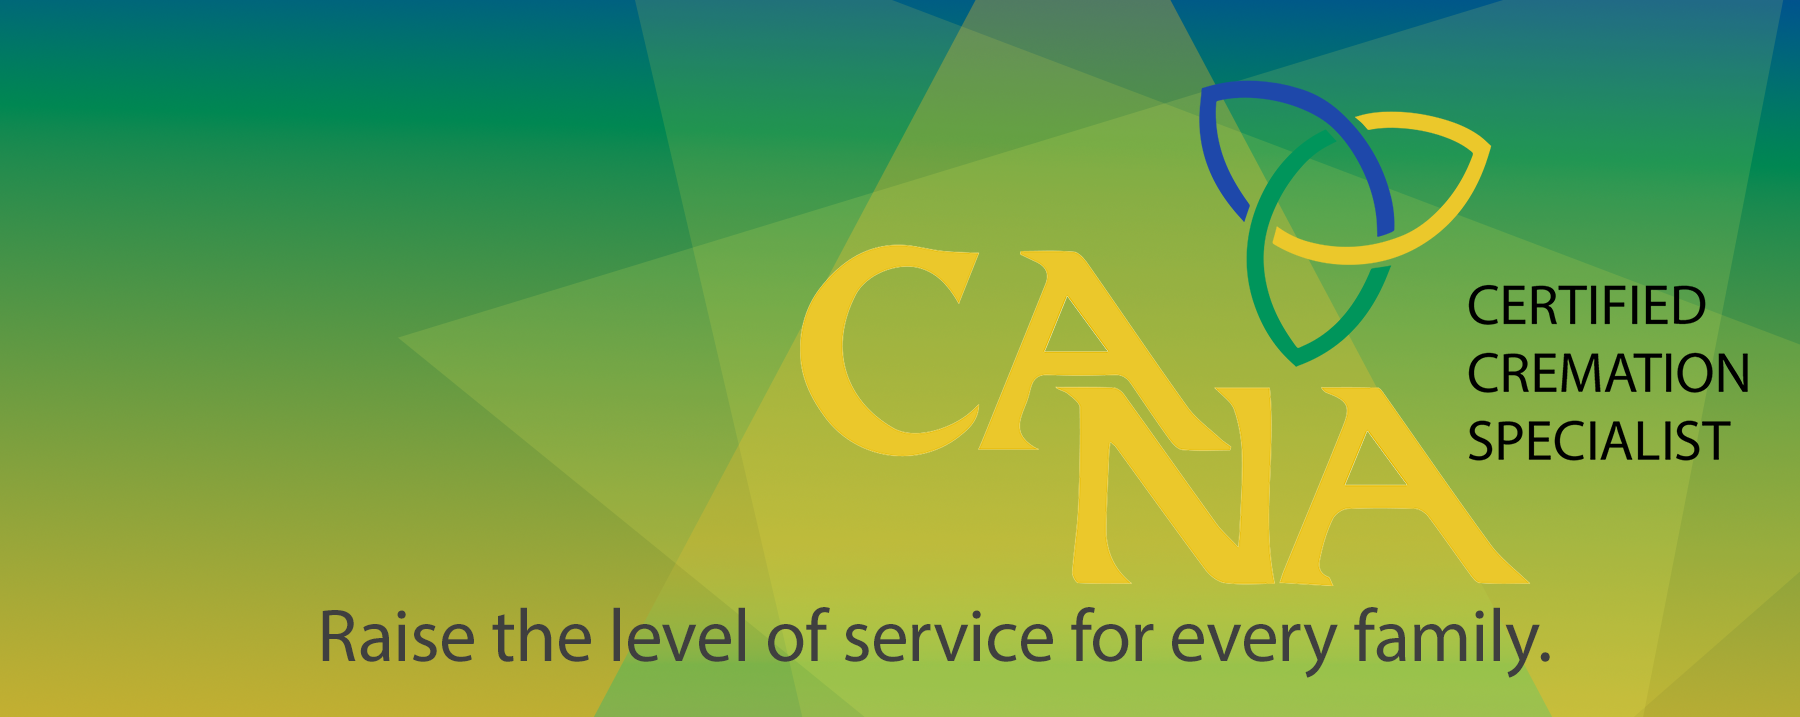 CANA Certified Cremation Specialist graphic